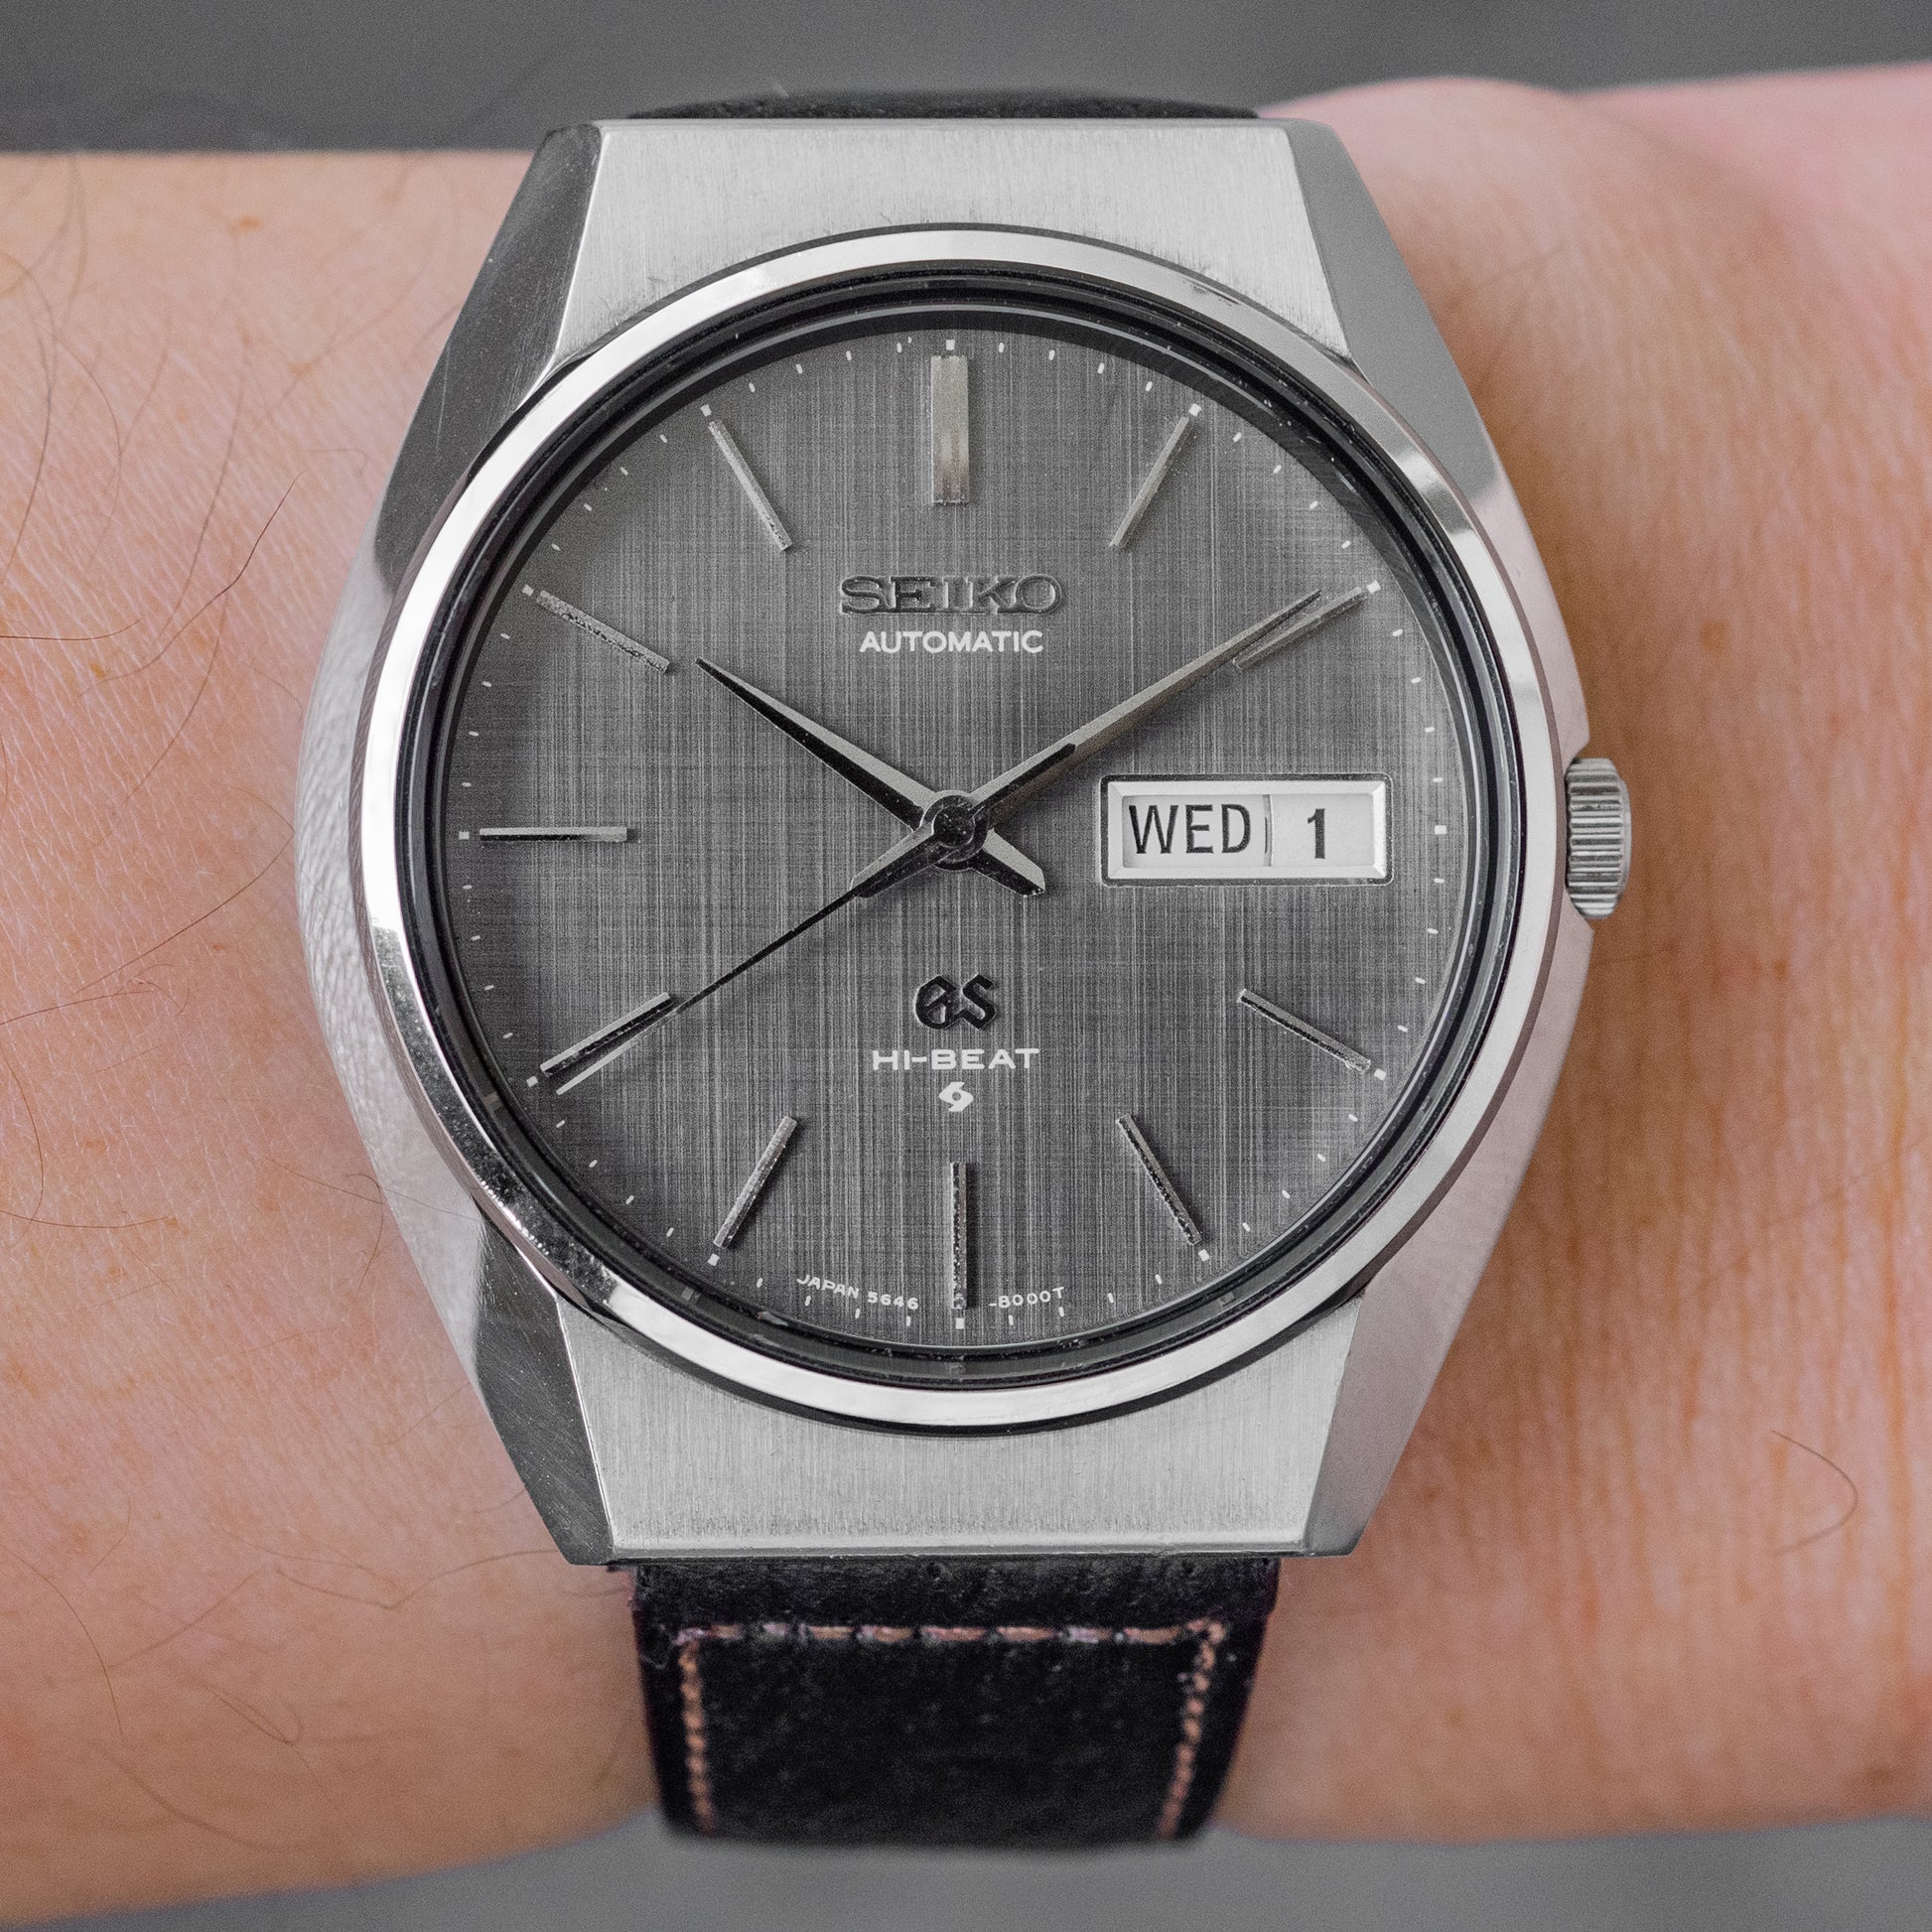 No. 253 / Grand Seiko 56GS HI-BEAT - 1971 – From Time To Times